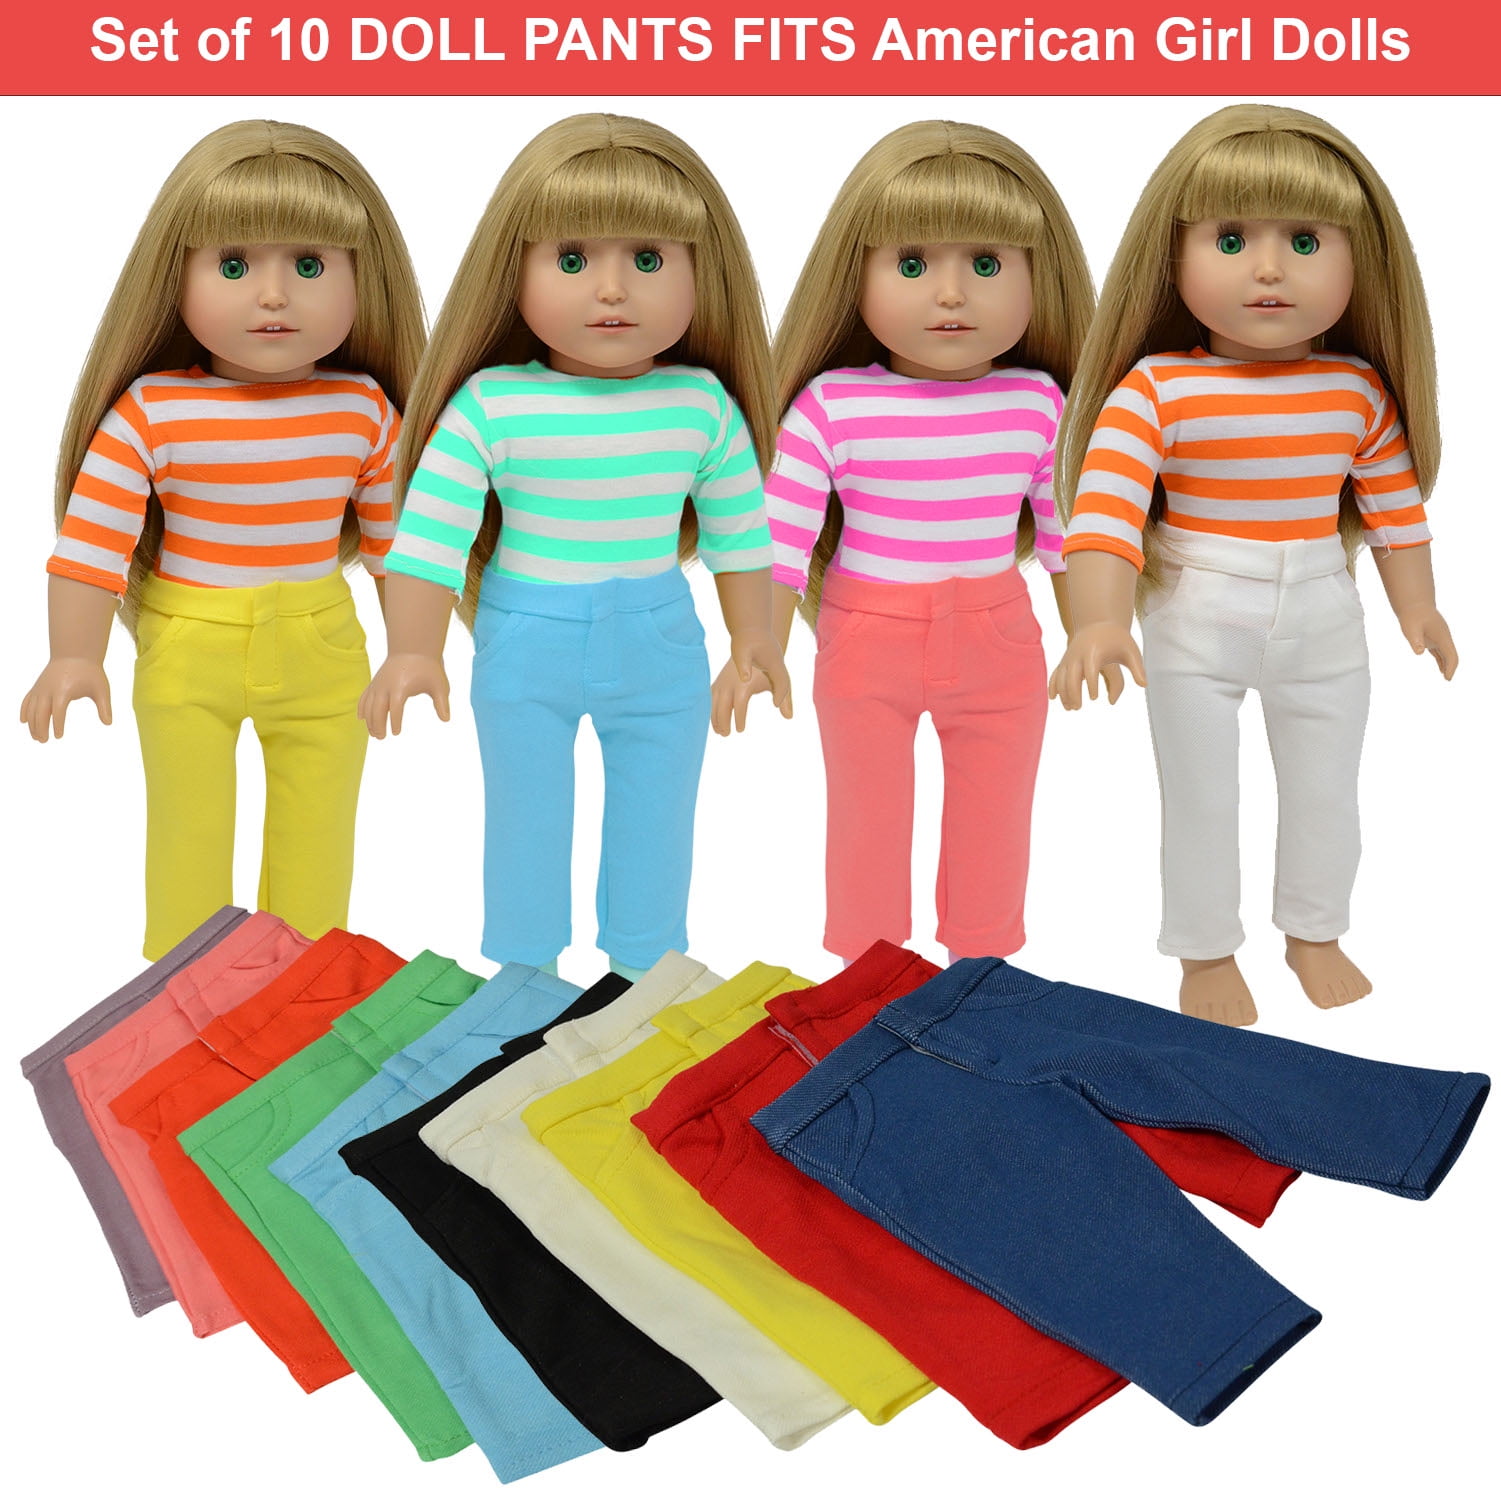 Butterfly Denim Pant Set 18 "Doll Clothes Fits American Girl Dolls